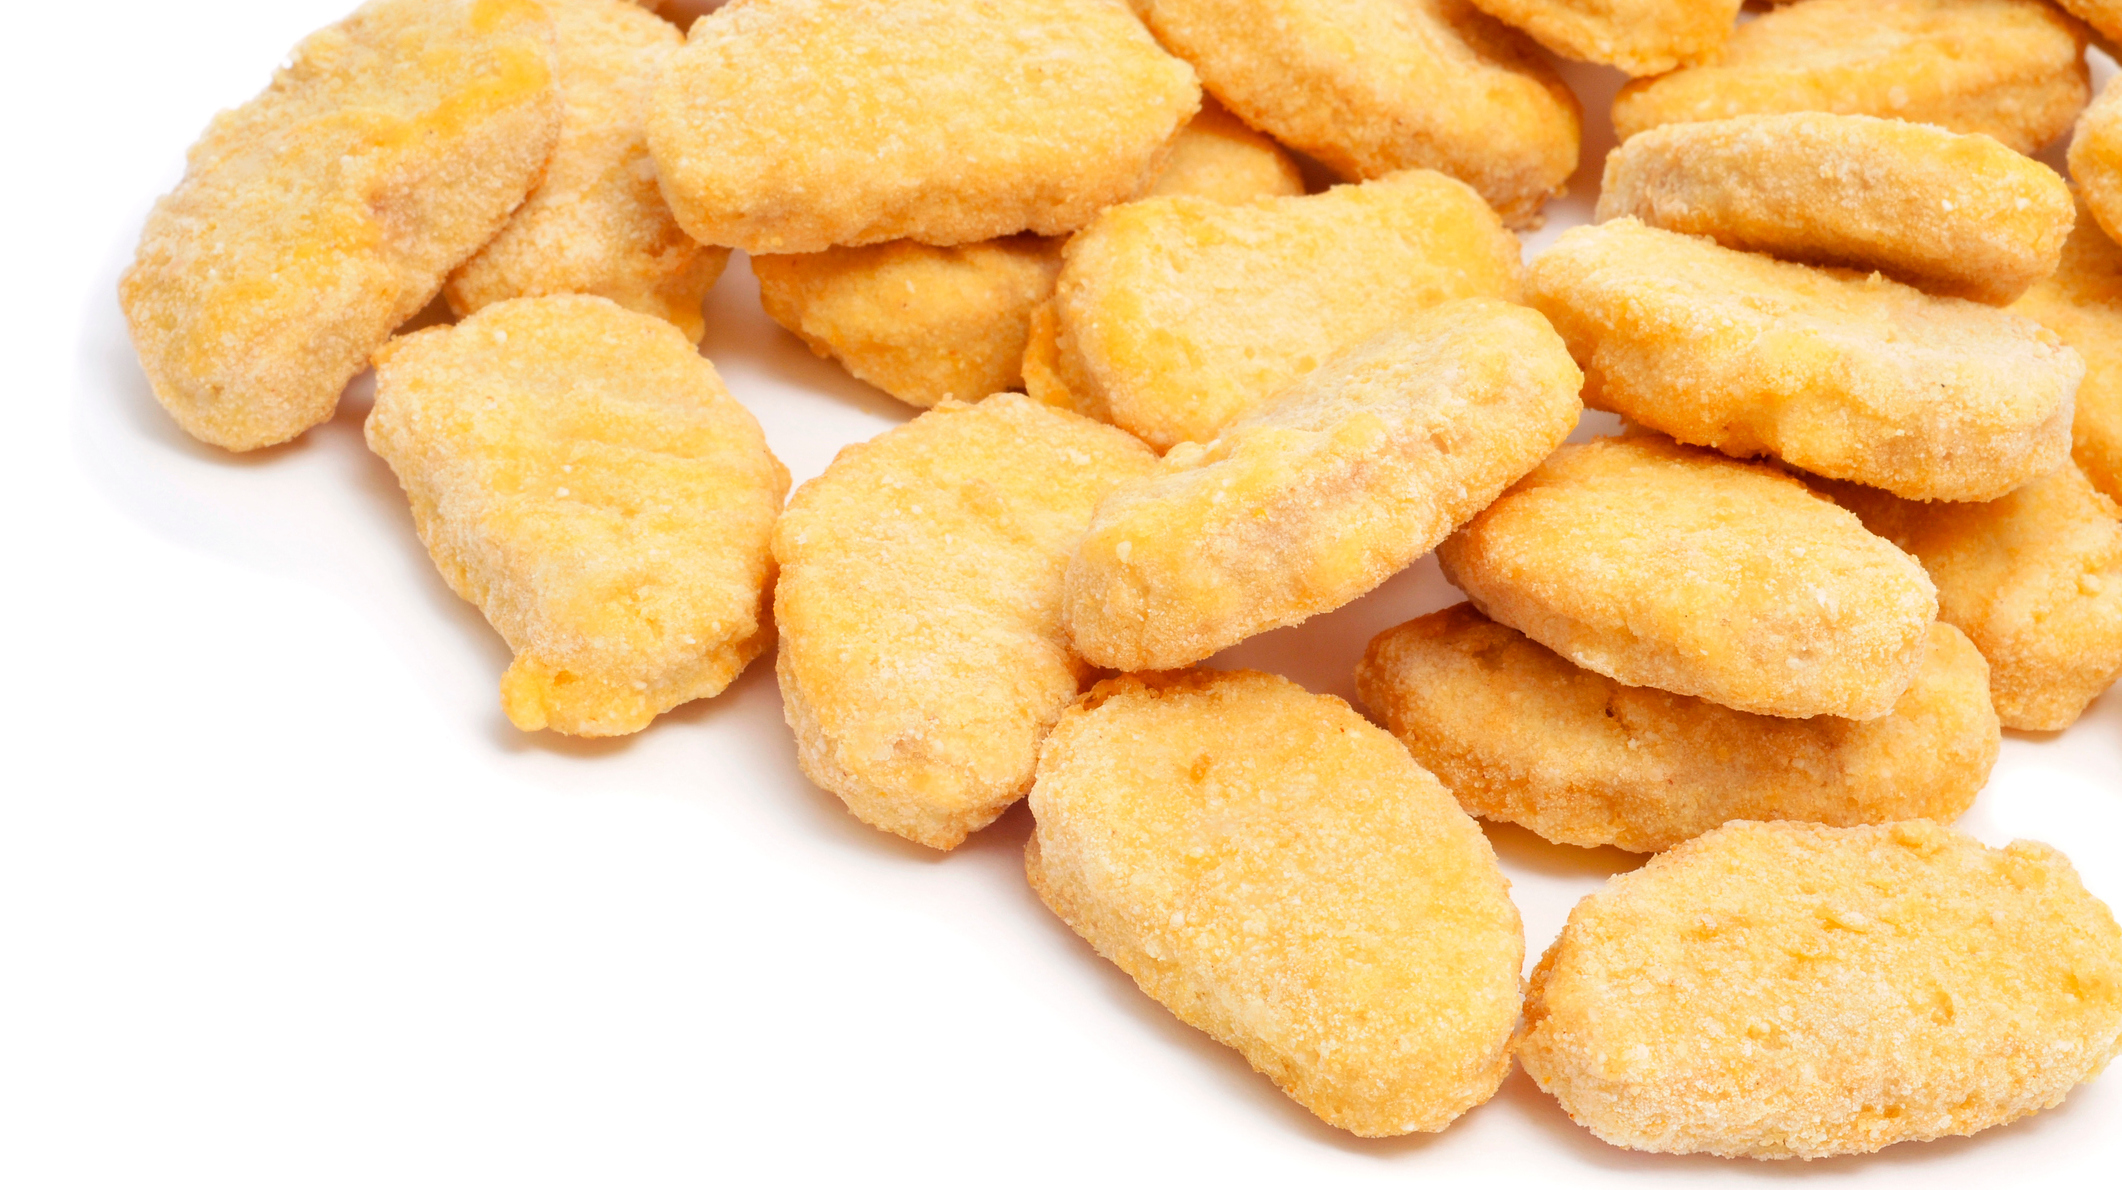 Perdue Gluten-Free Chicken Nuggets Recalled Because They May Contain Wood